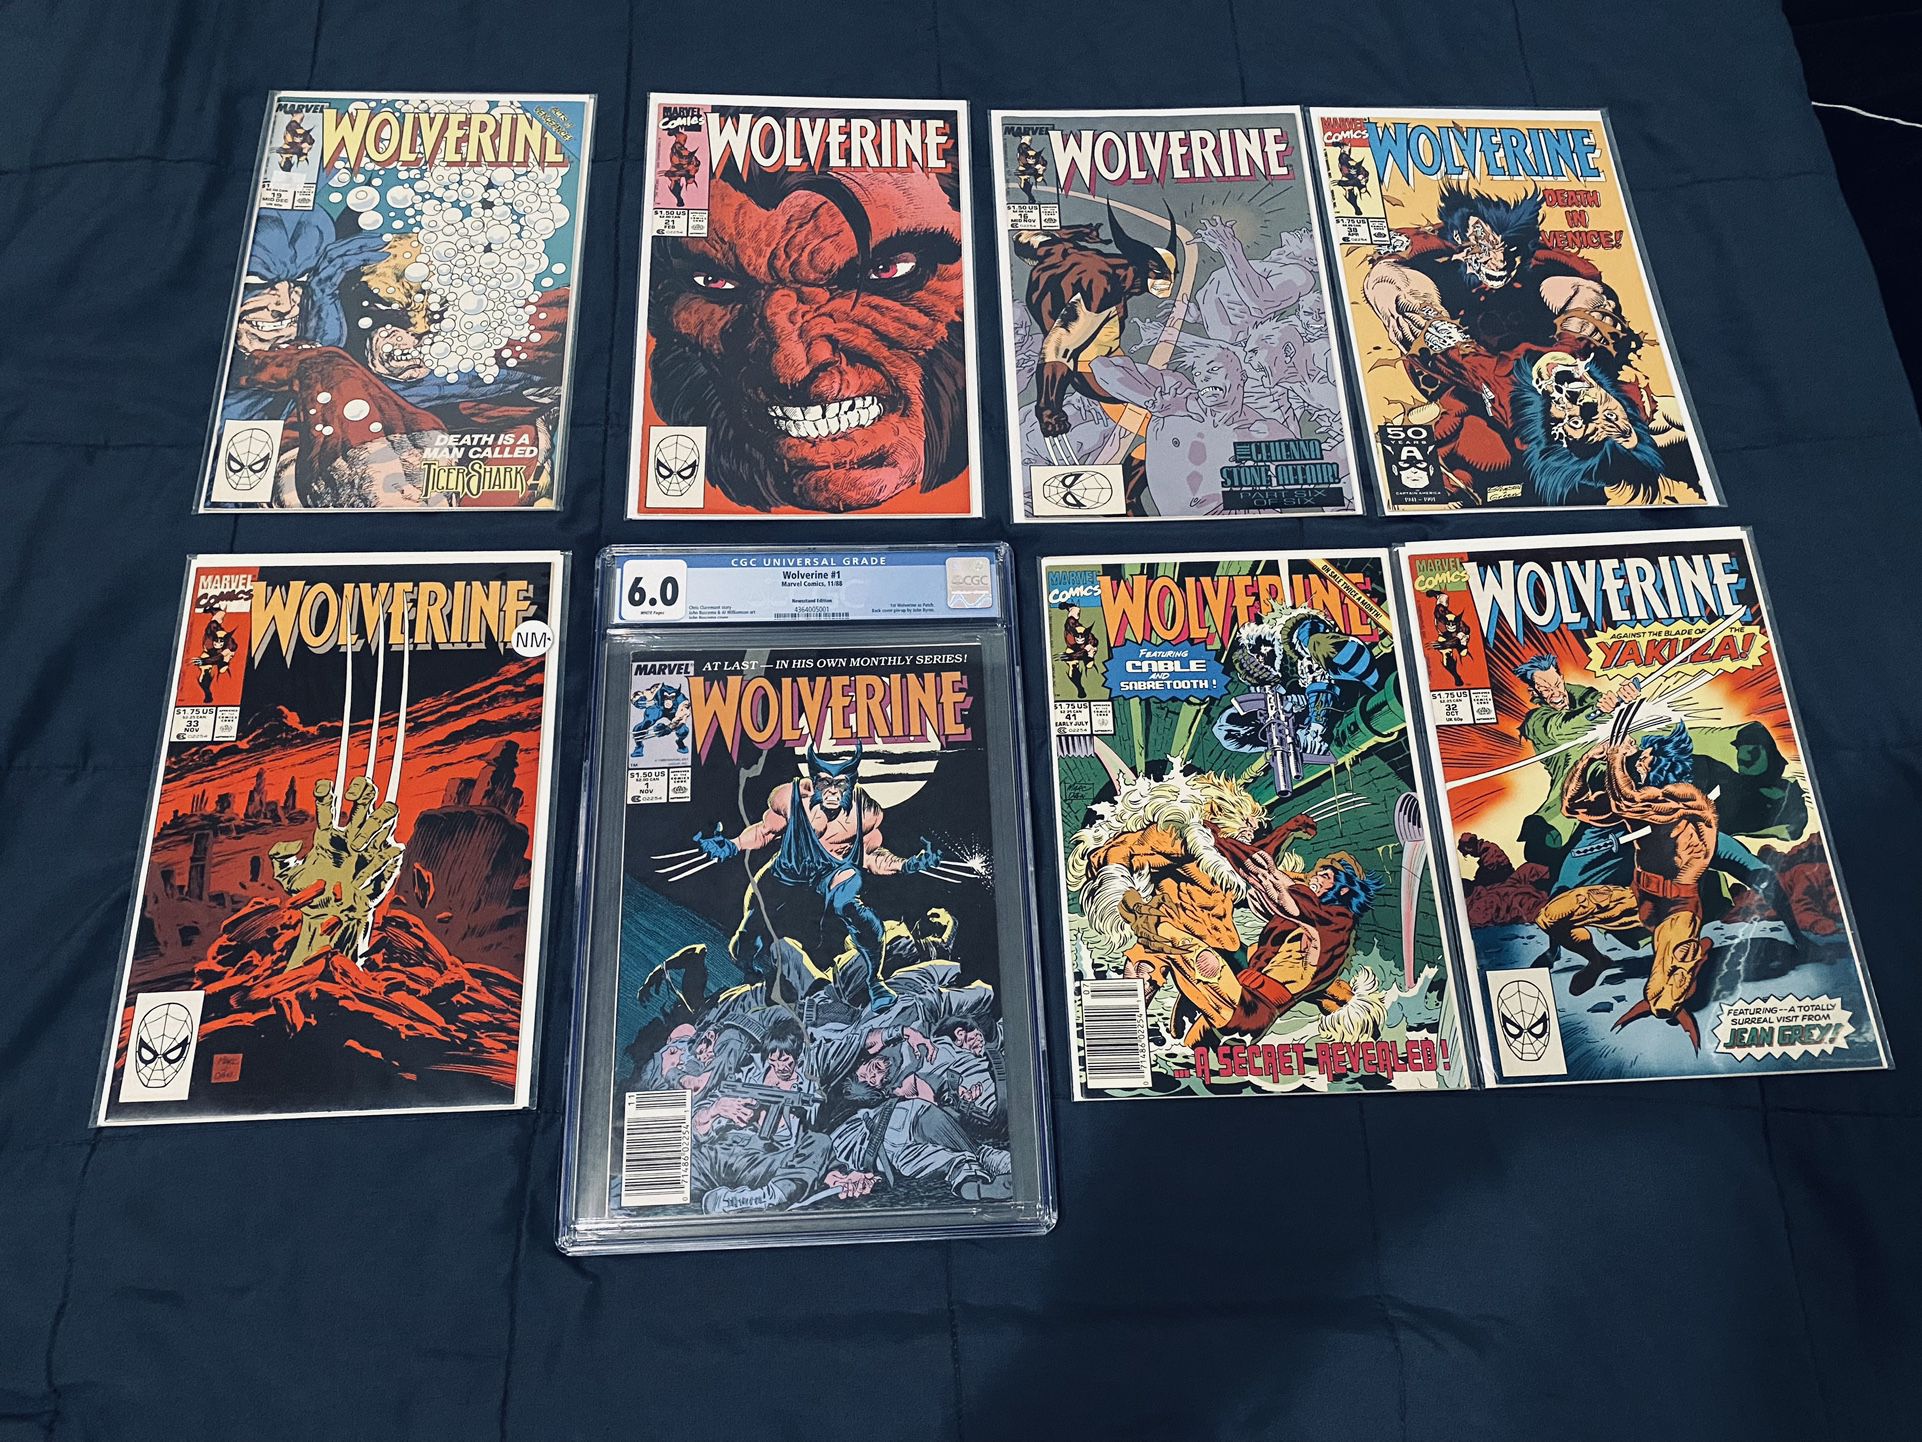 Wolverine 1 CGC 6.0 Newsstand Edition 1988 & 16 19, 21,32 33, 41, High-Grade 9.4-9.6 Adult Owned Purchased For Collecting 